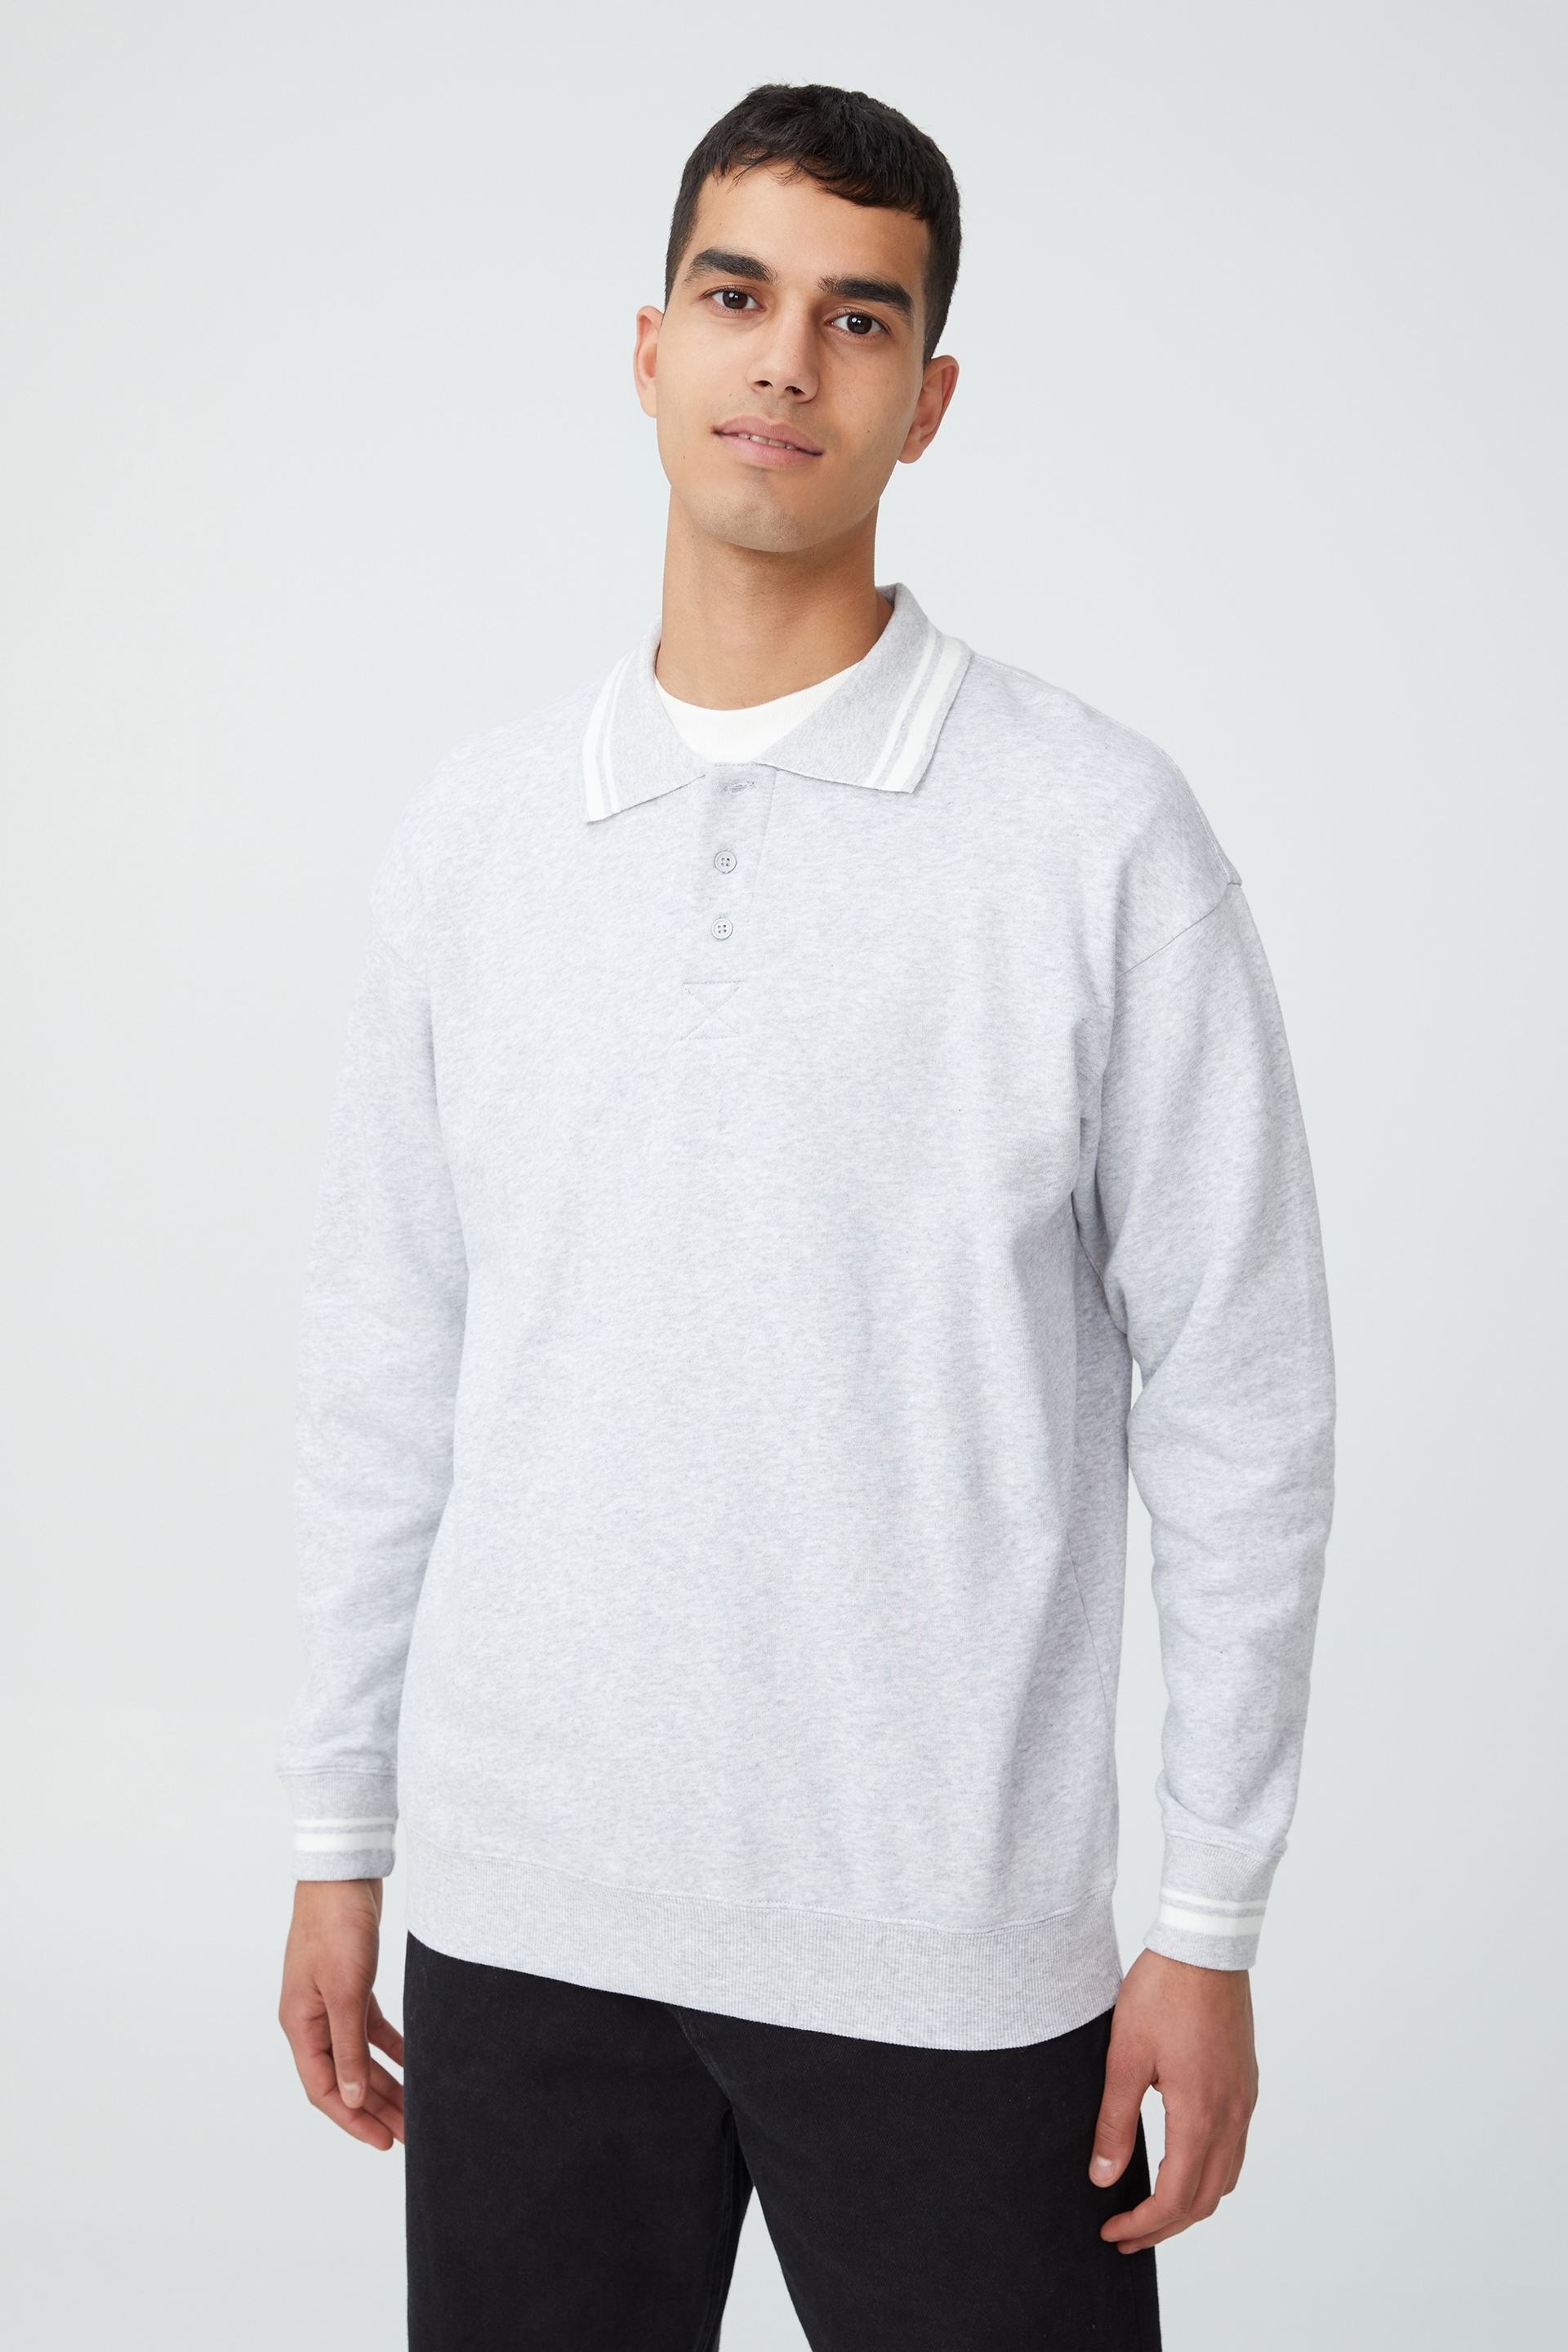 Cotton On Men - Box Fit Rugby Fleece - Light grey marle